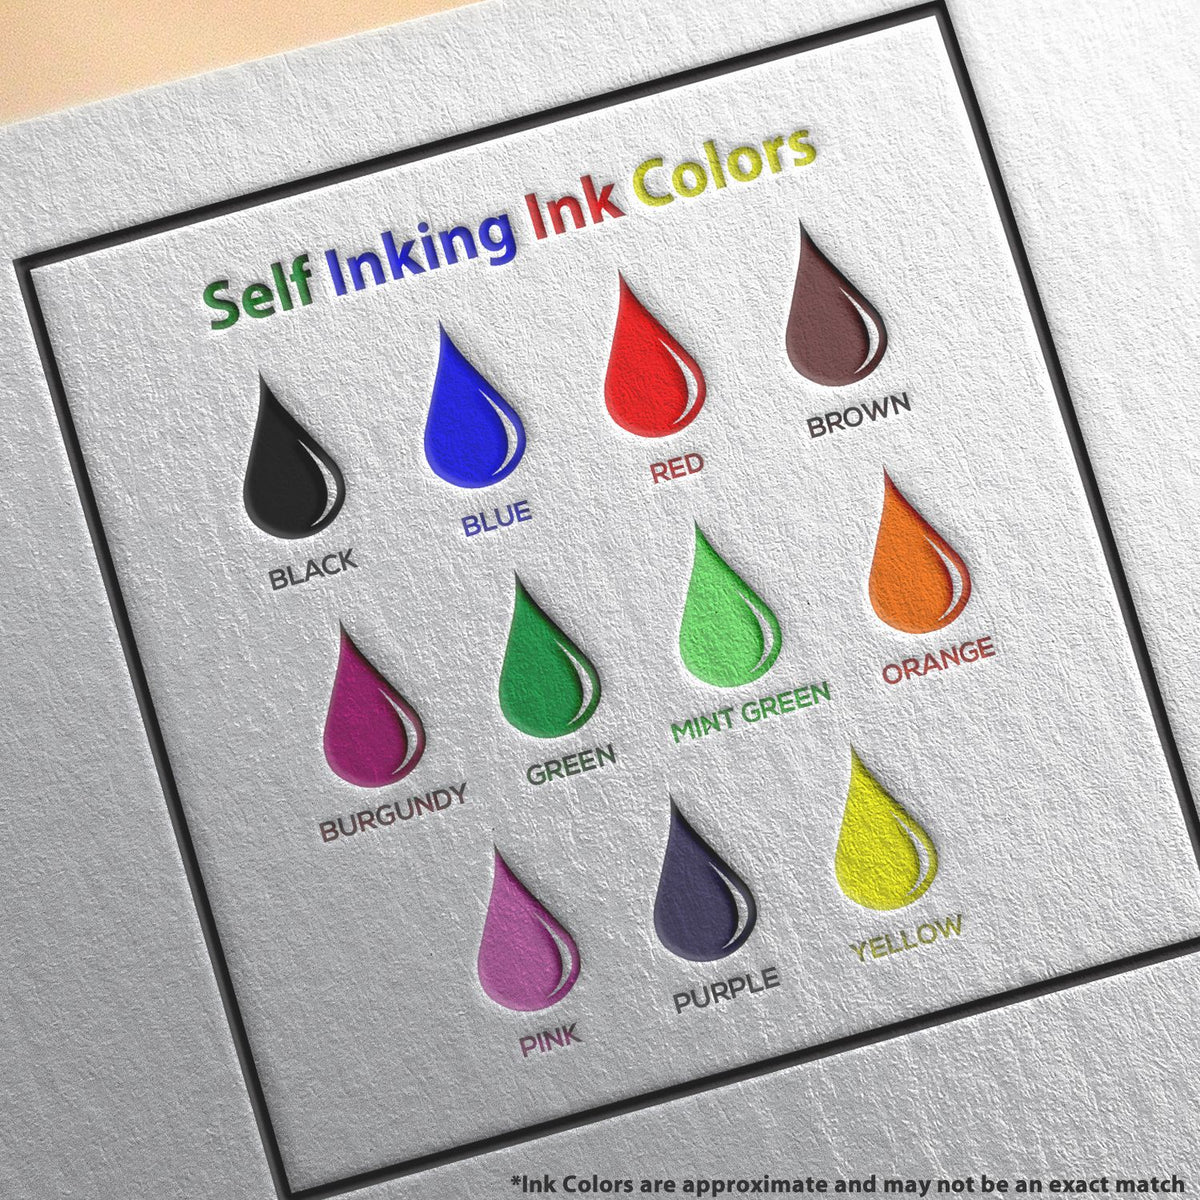 A picture showing the different ink colors or hues available for the Self-Inking Minnesota Geologist Stamp